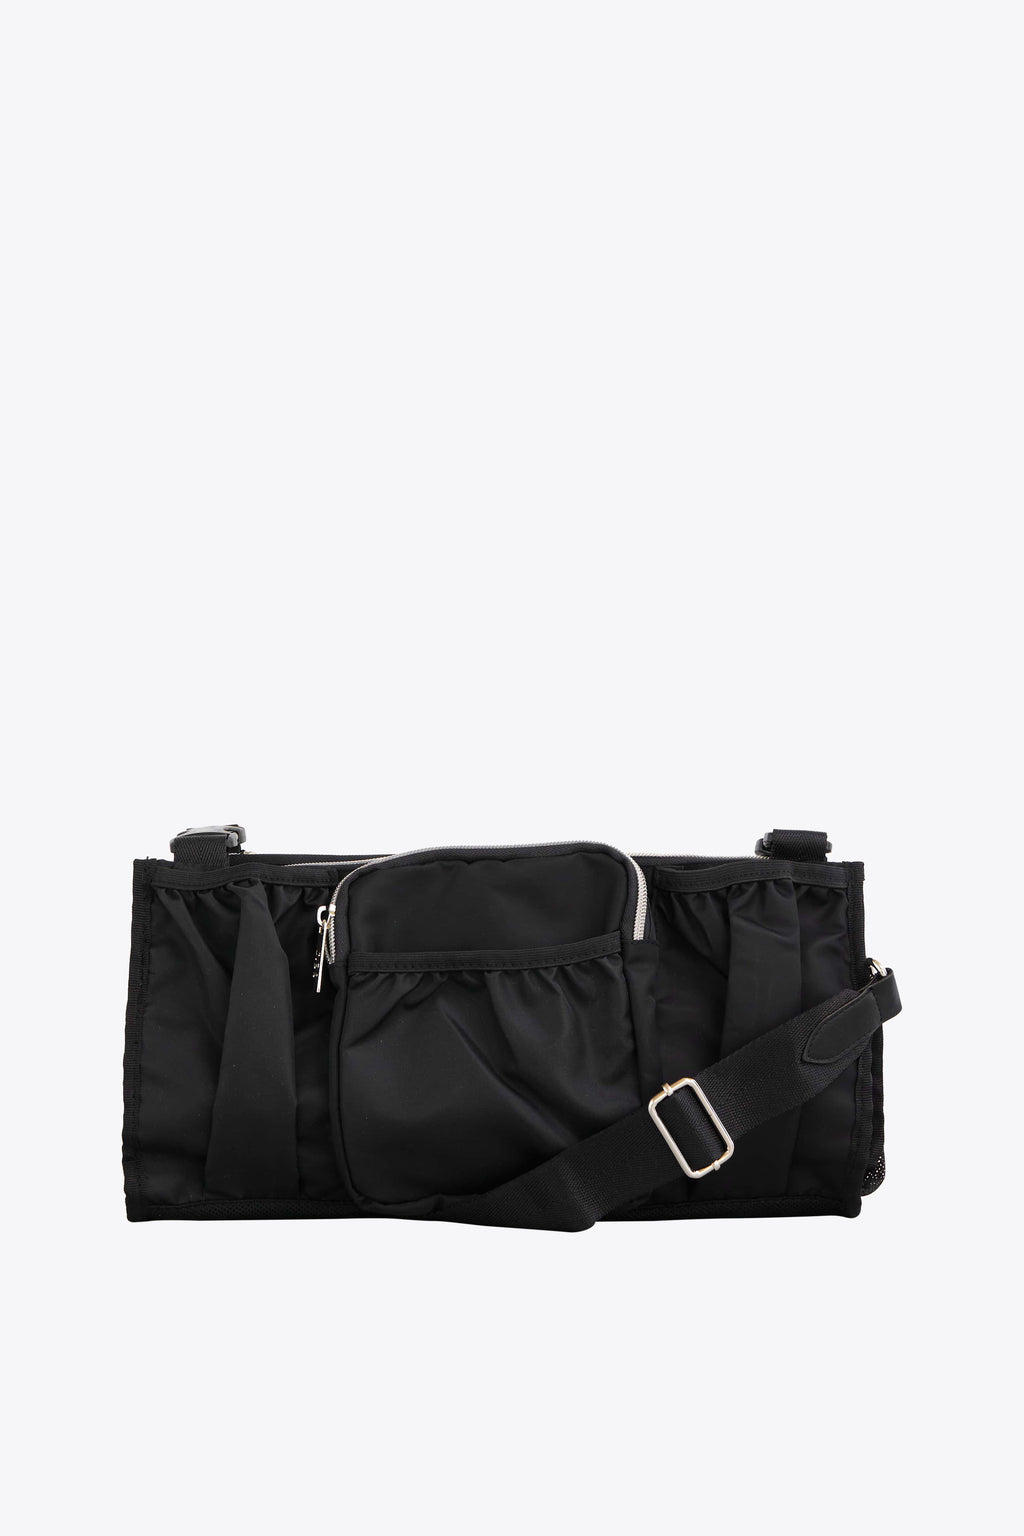 Colugo The on The Go Organizer and Fanny Pack in Black